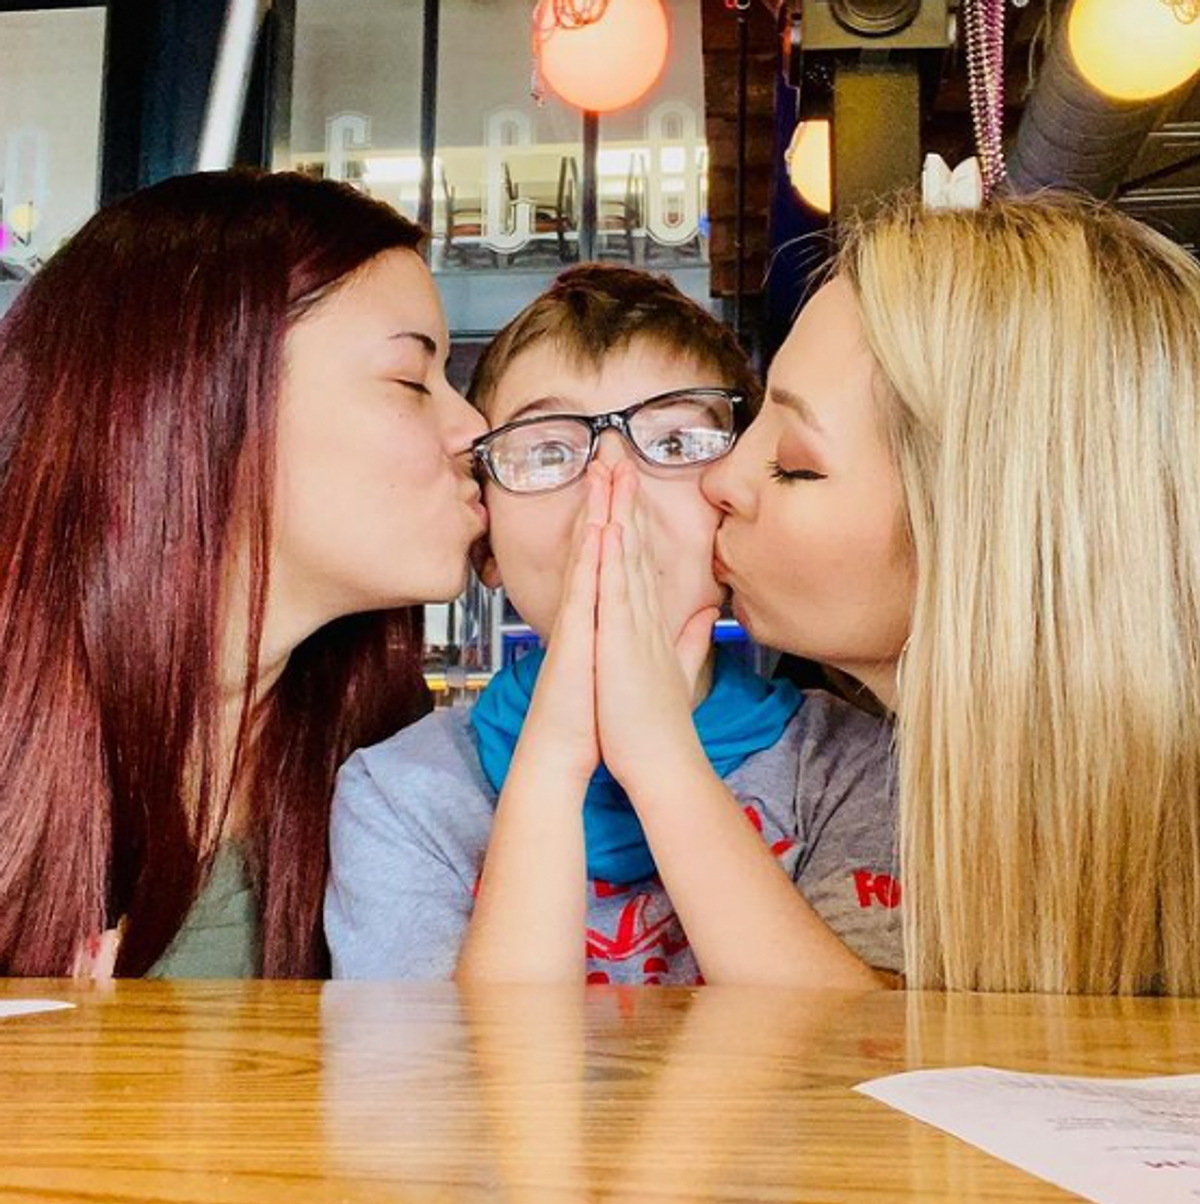 Stepmom Force Daughter For Sex - Mom and stepmom become best friends and co-parents - Upworthy